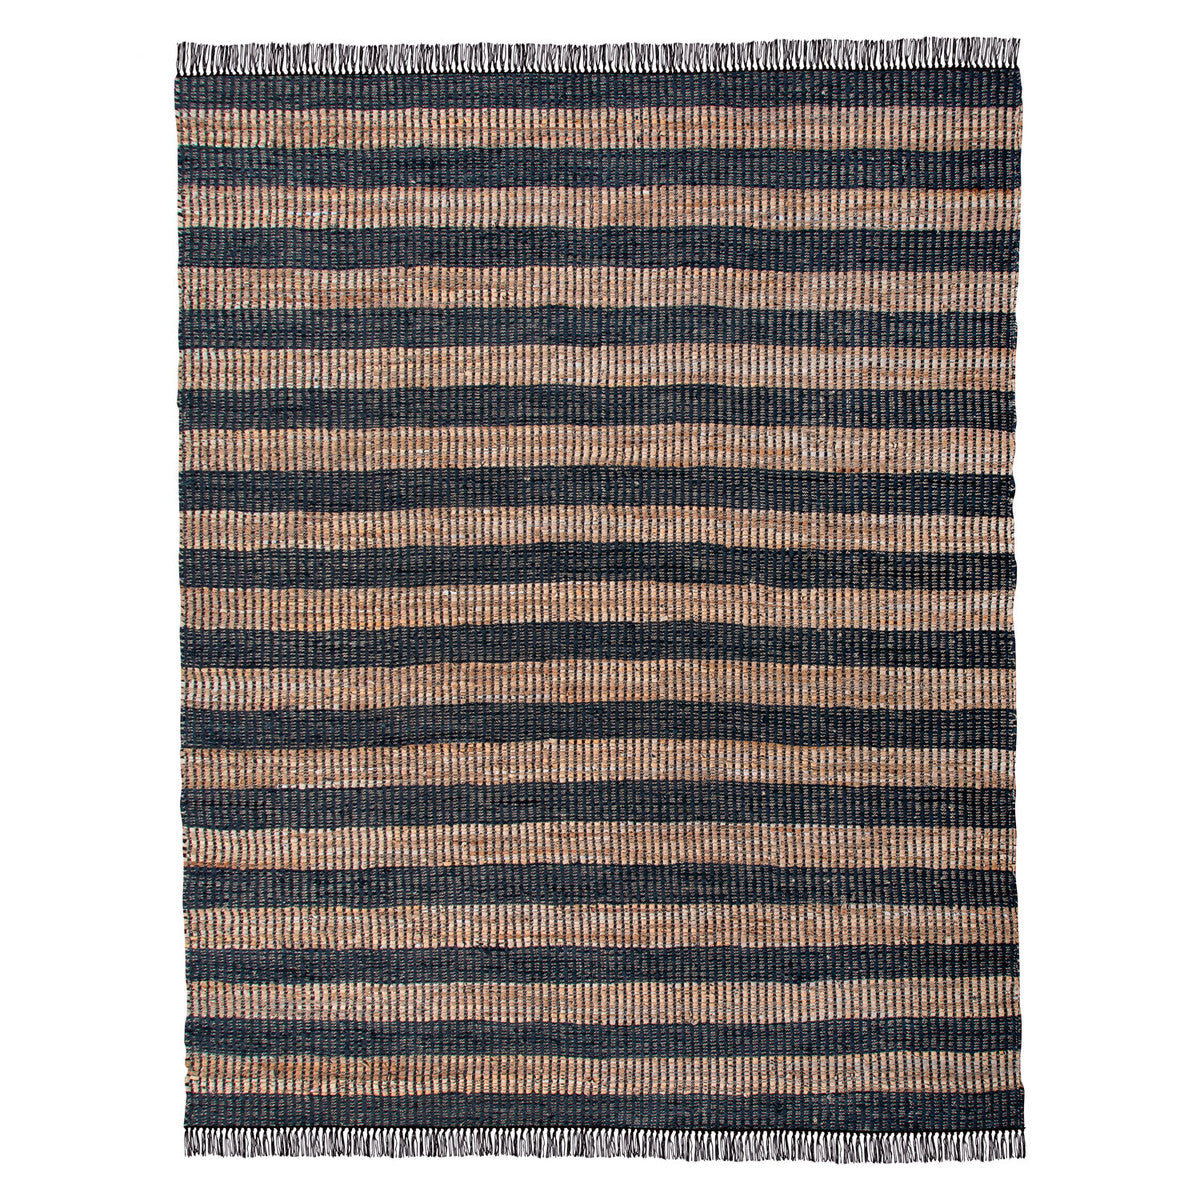 Park Hill Collection Leather And Hemp Woven Rug